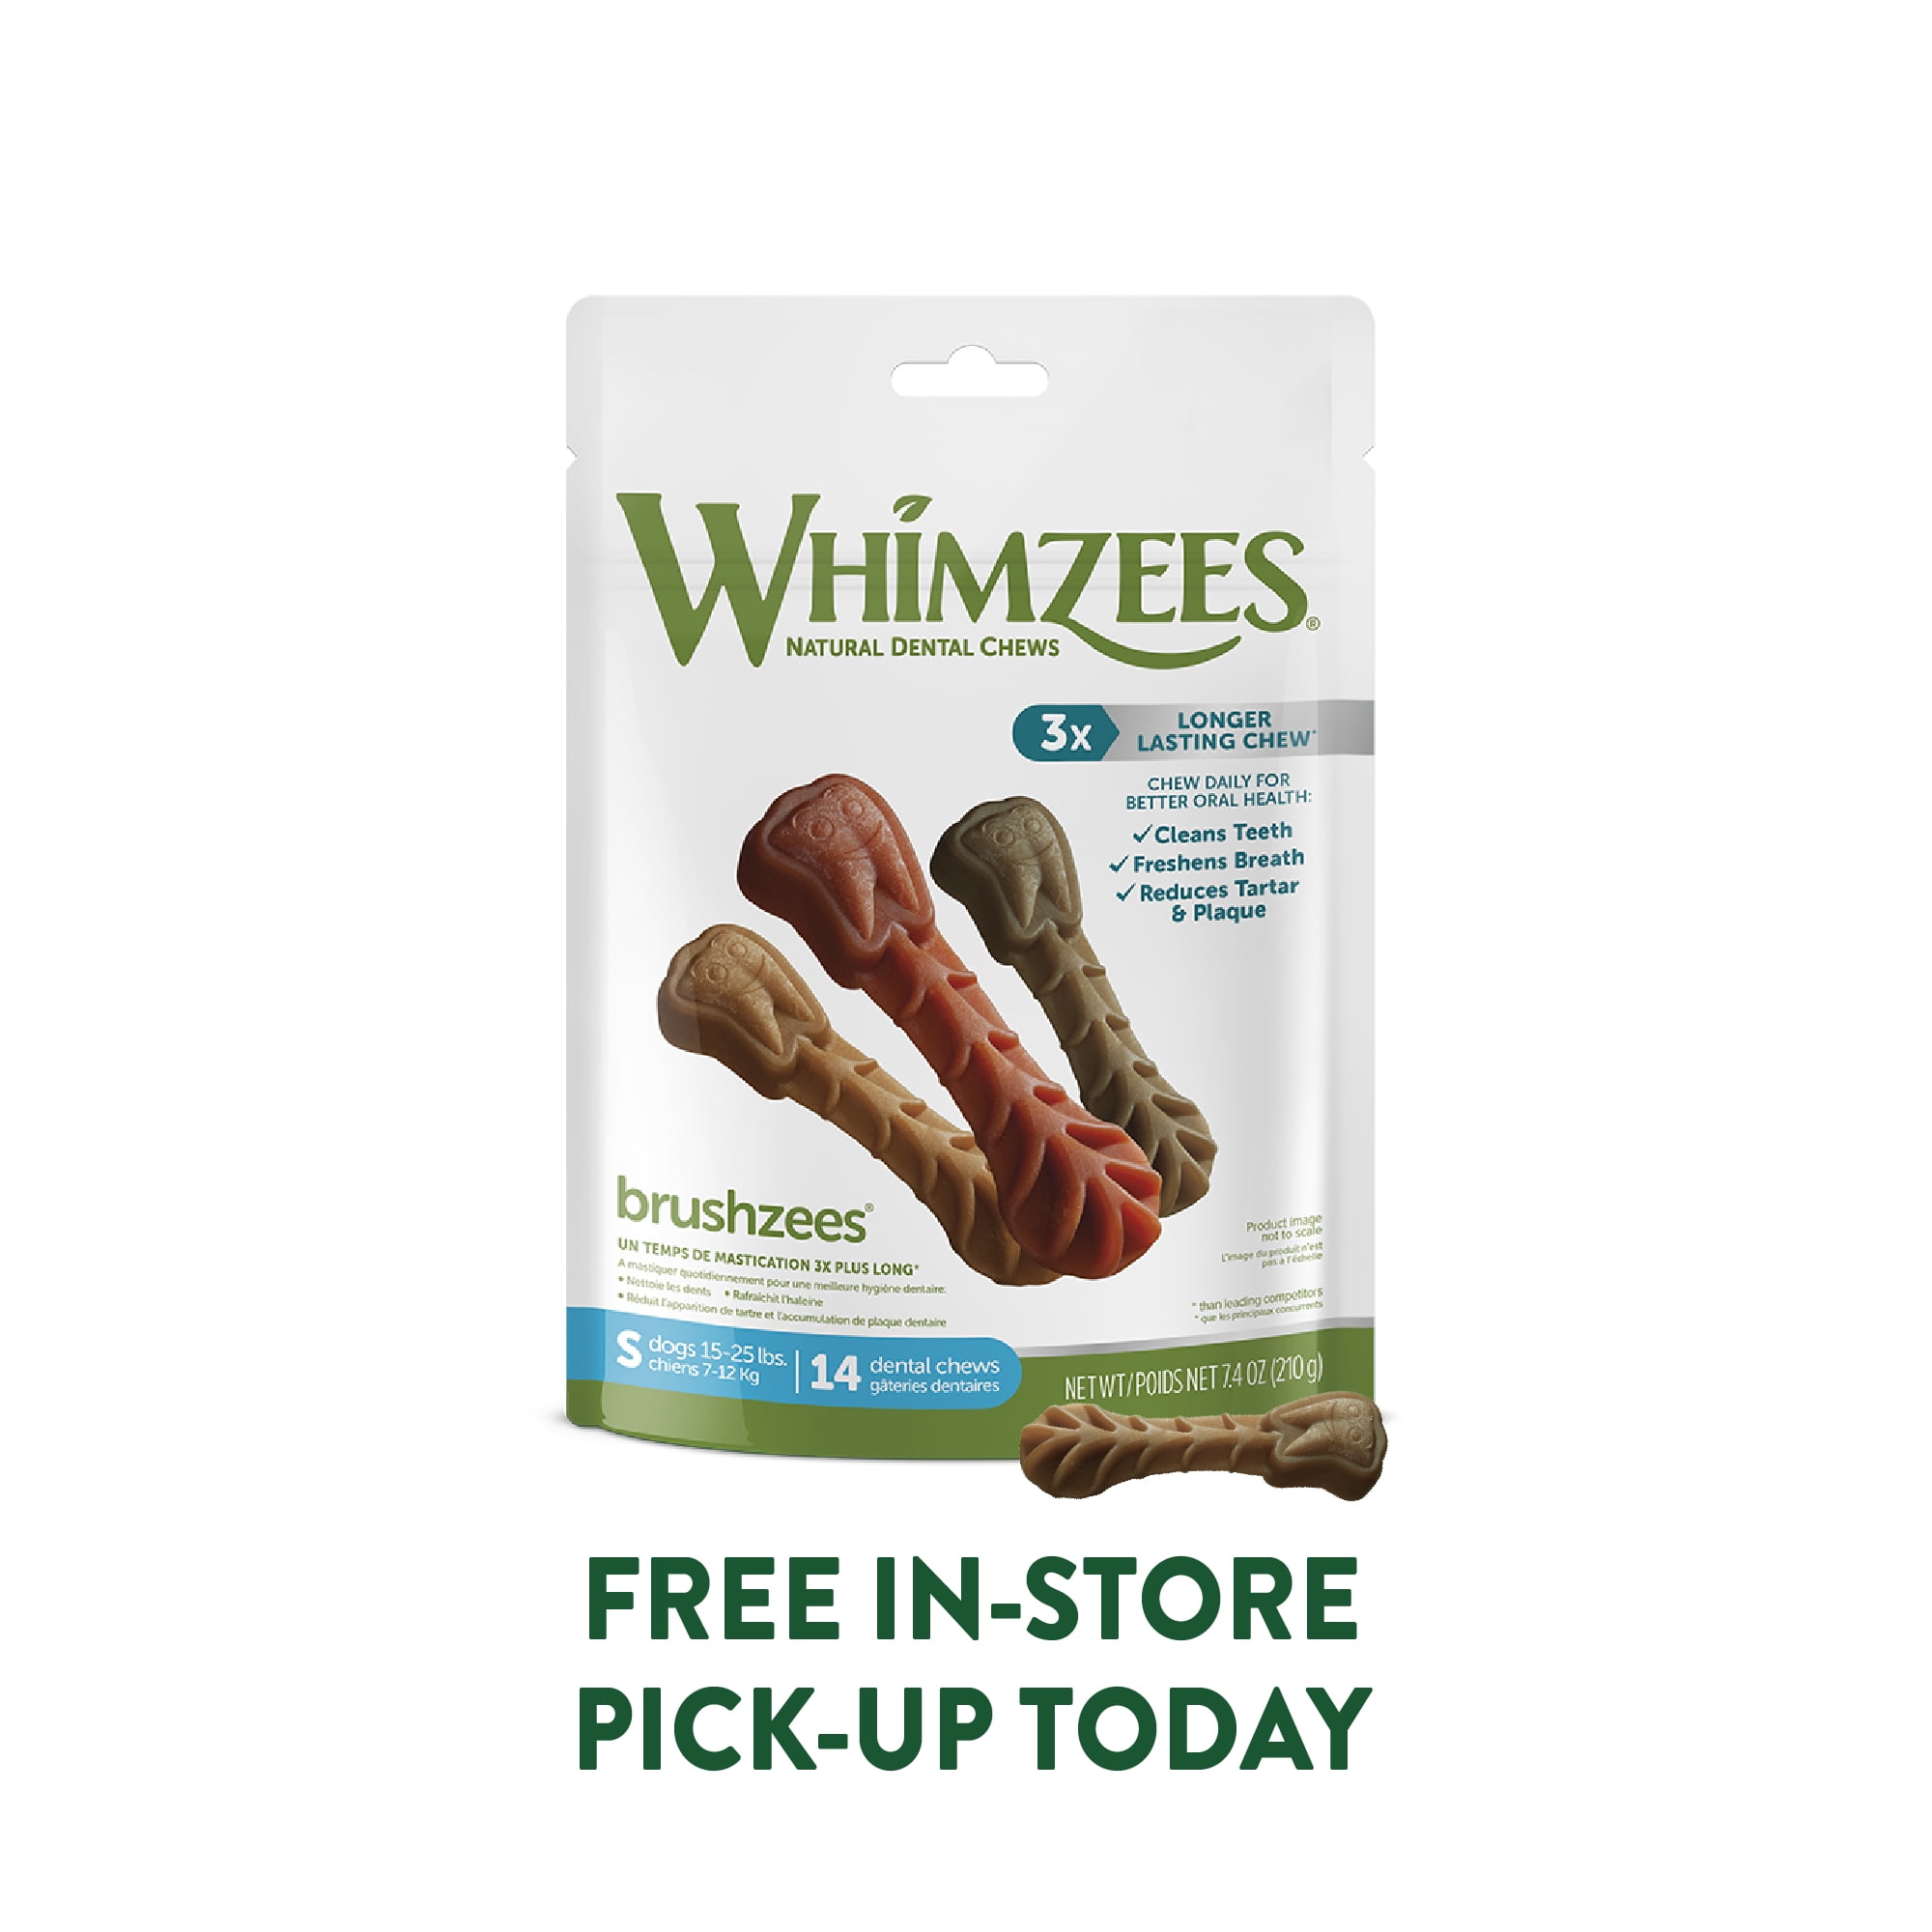 Whimzees Daily Use Pack Dental Treats for Dogs, Small Brushzees Bag of 14